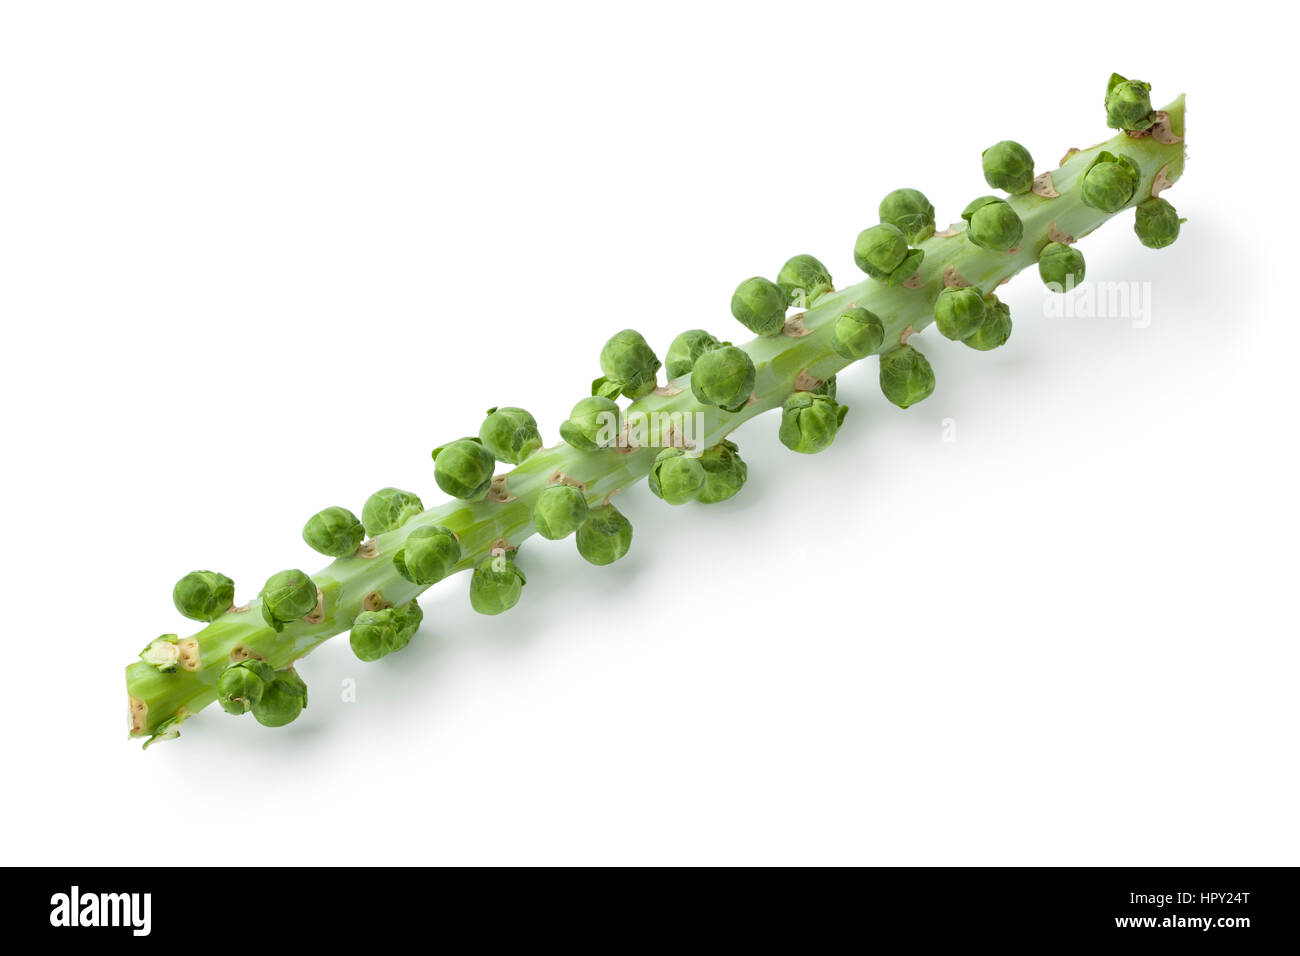 Stalk with fresh Brussels sprouts on white background Stock Photo